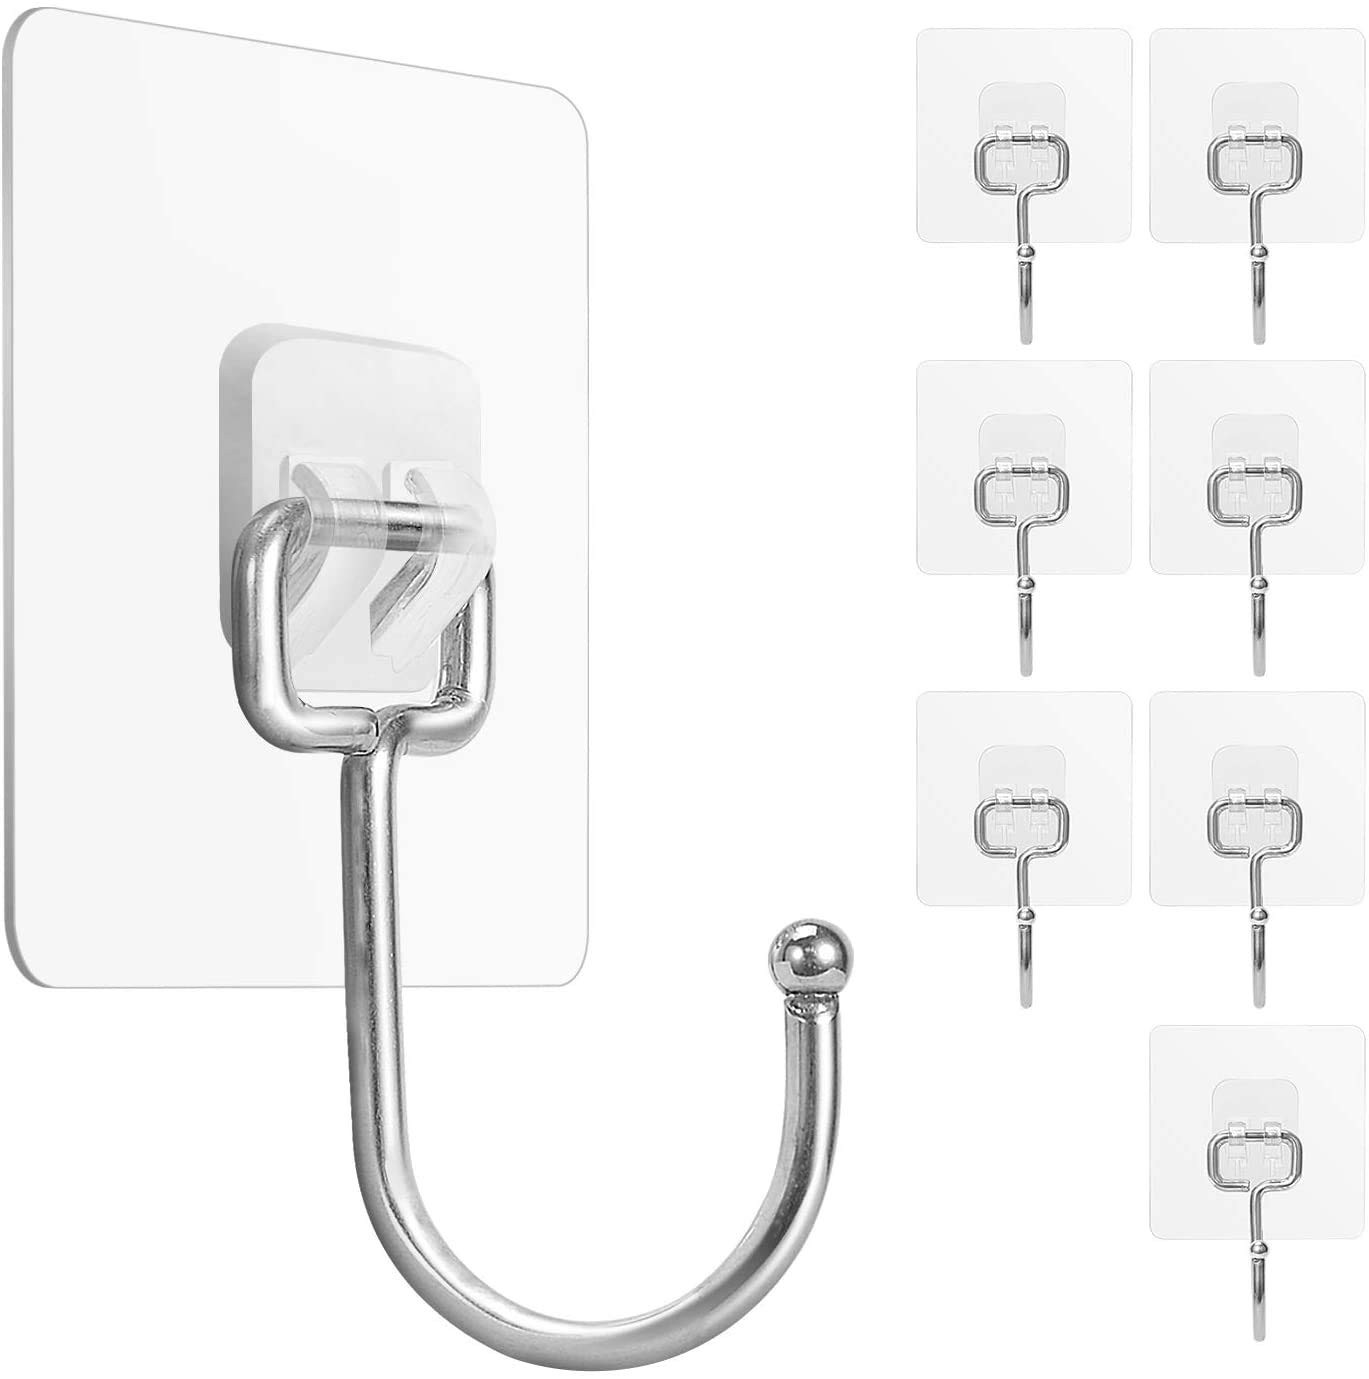 Jialto Large Adhesive Hooks 22Ib(Max), Waterproof and Rustproof Wall Hooks for Hanging Heavy Duty, Stainless Steel Towel and Coats Hooks to use